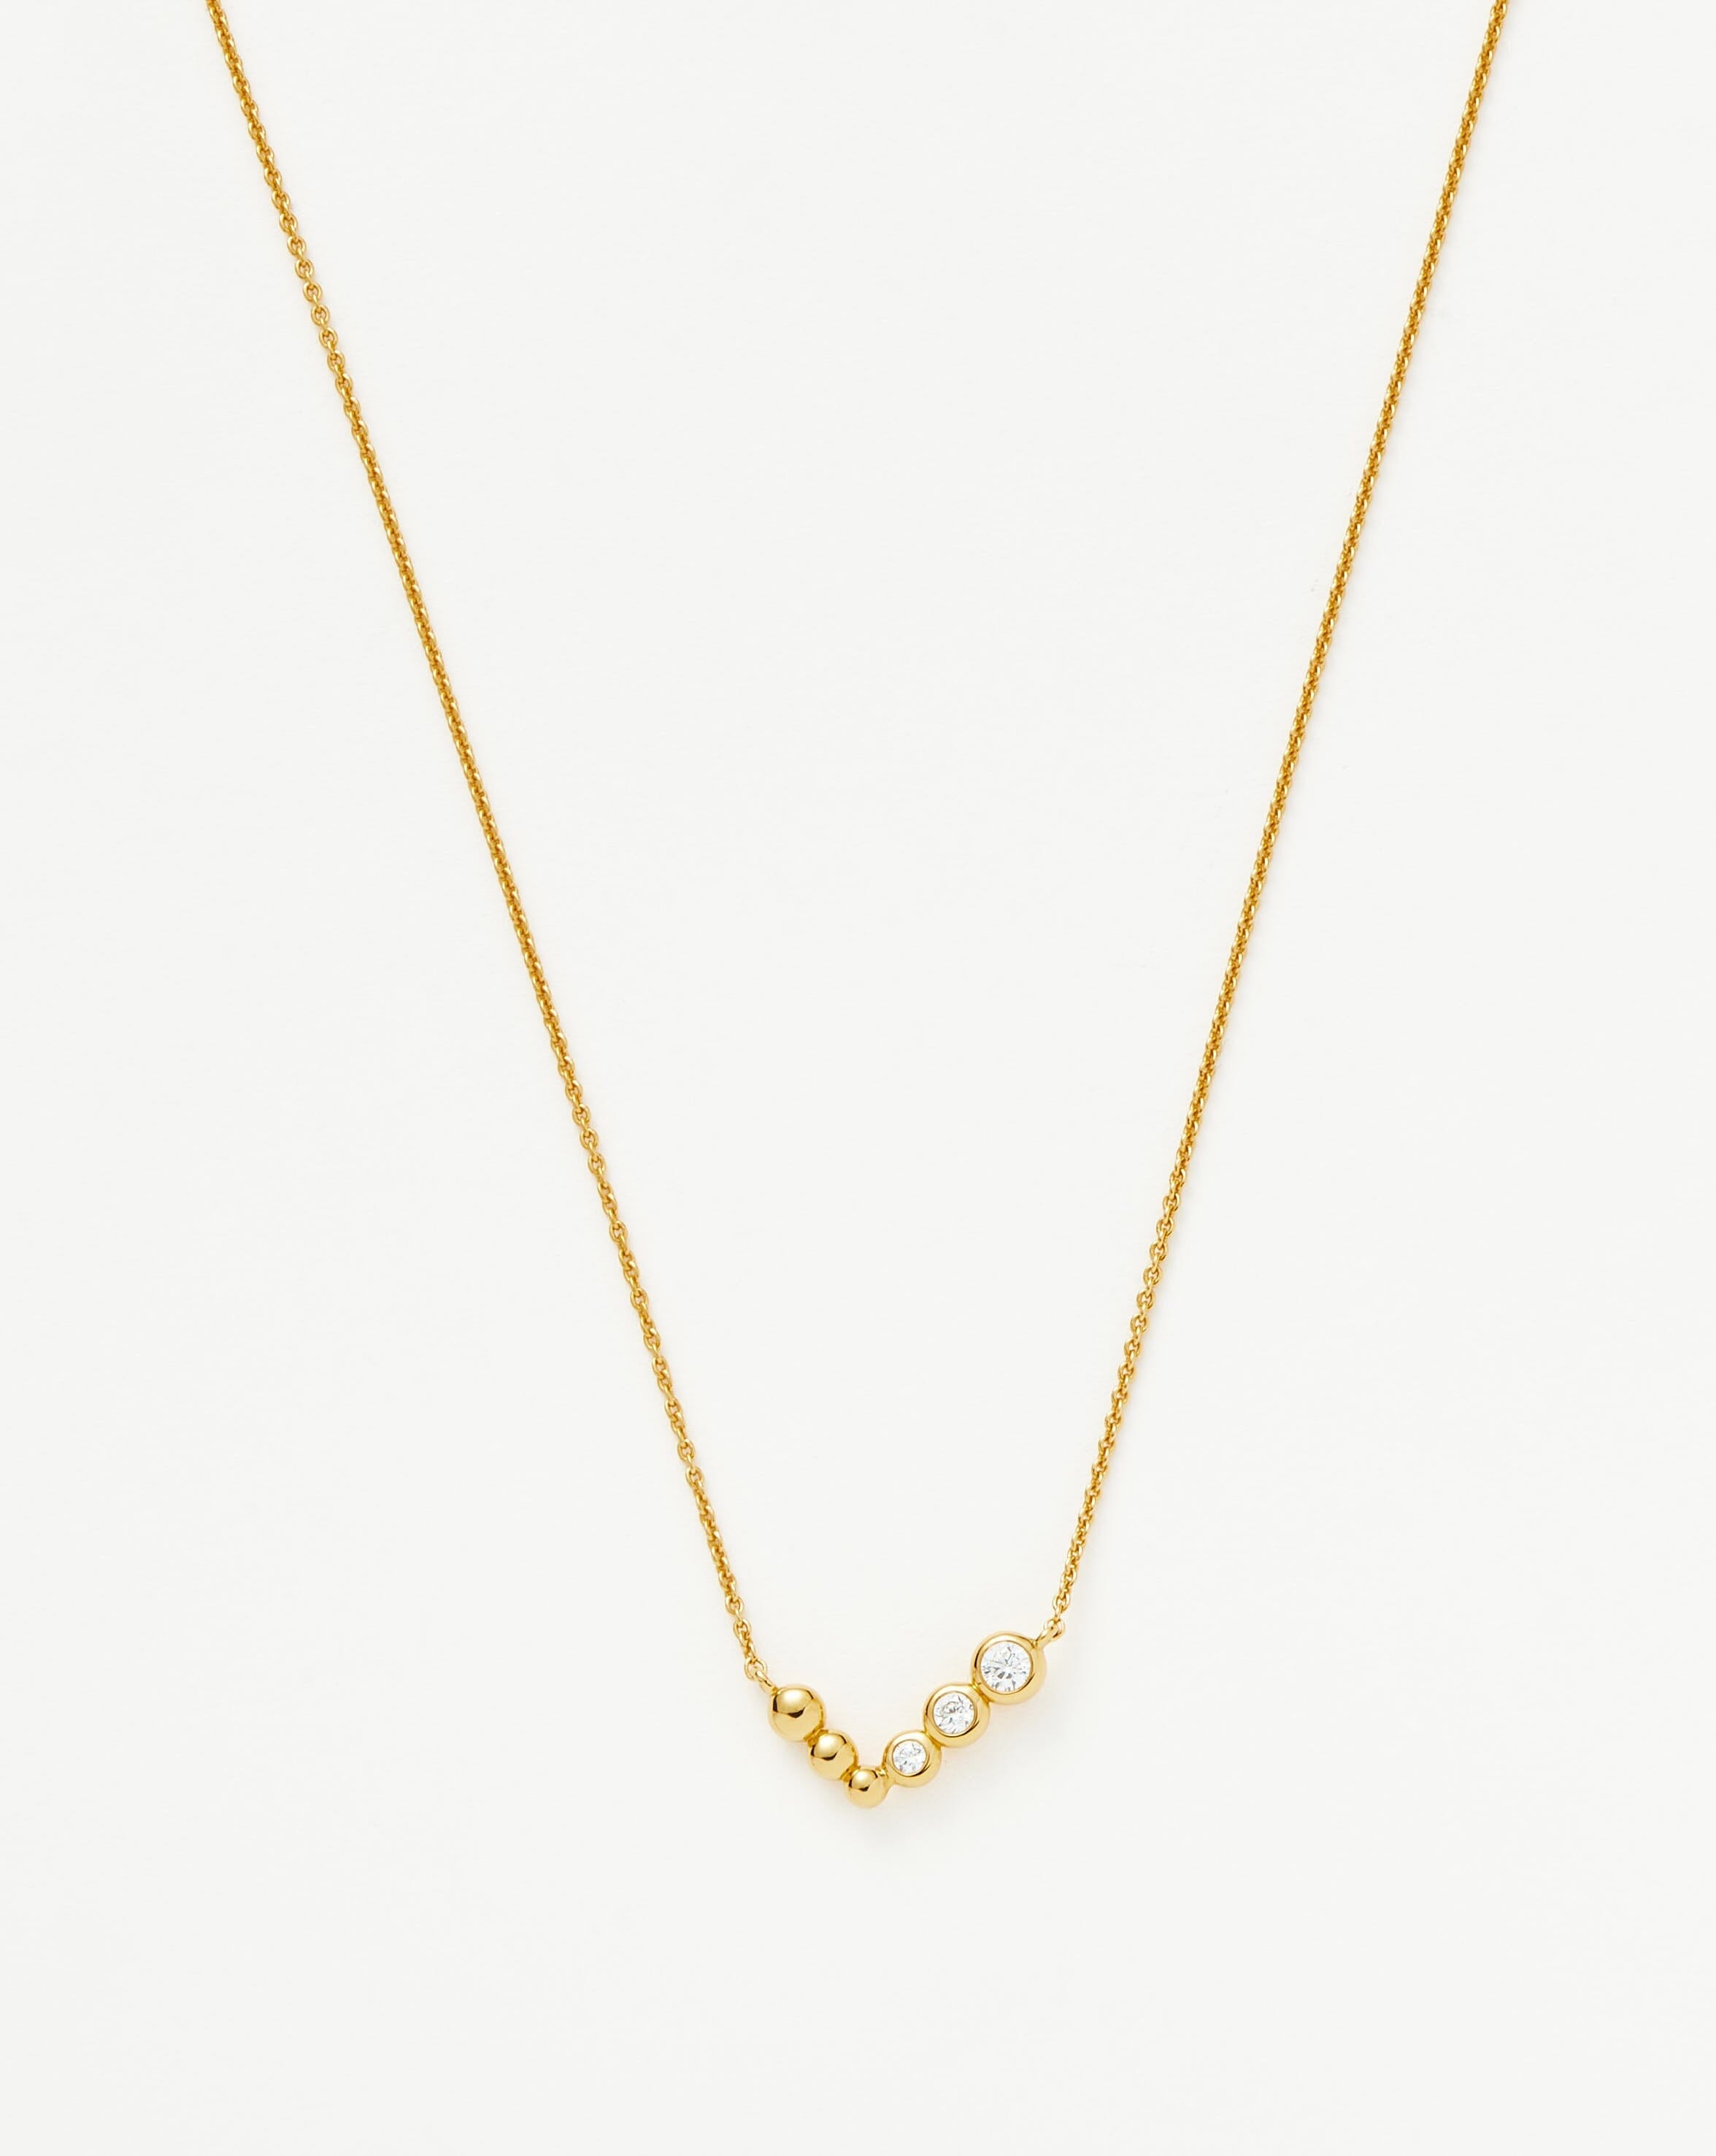 Articulated Beaded Stone Floating Necklace | 18ct Gold Plated Vermeil ...